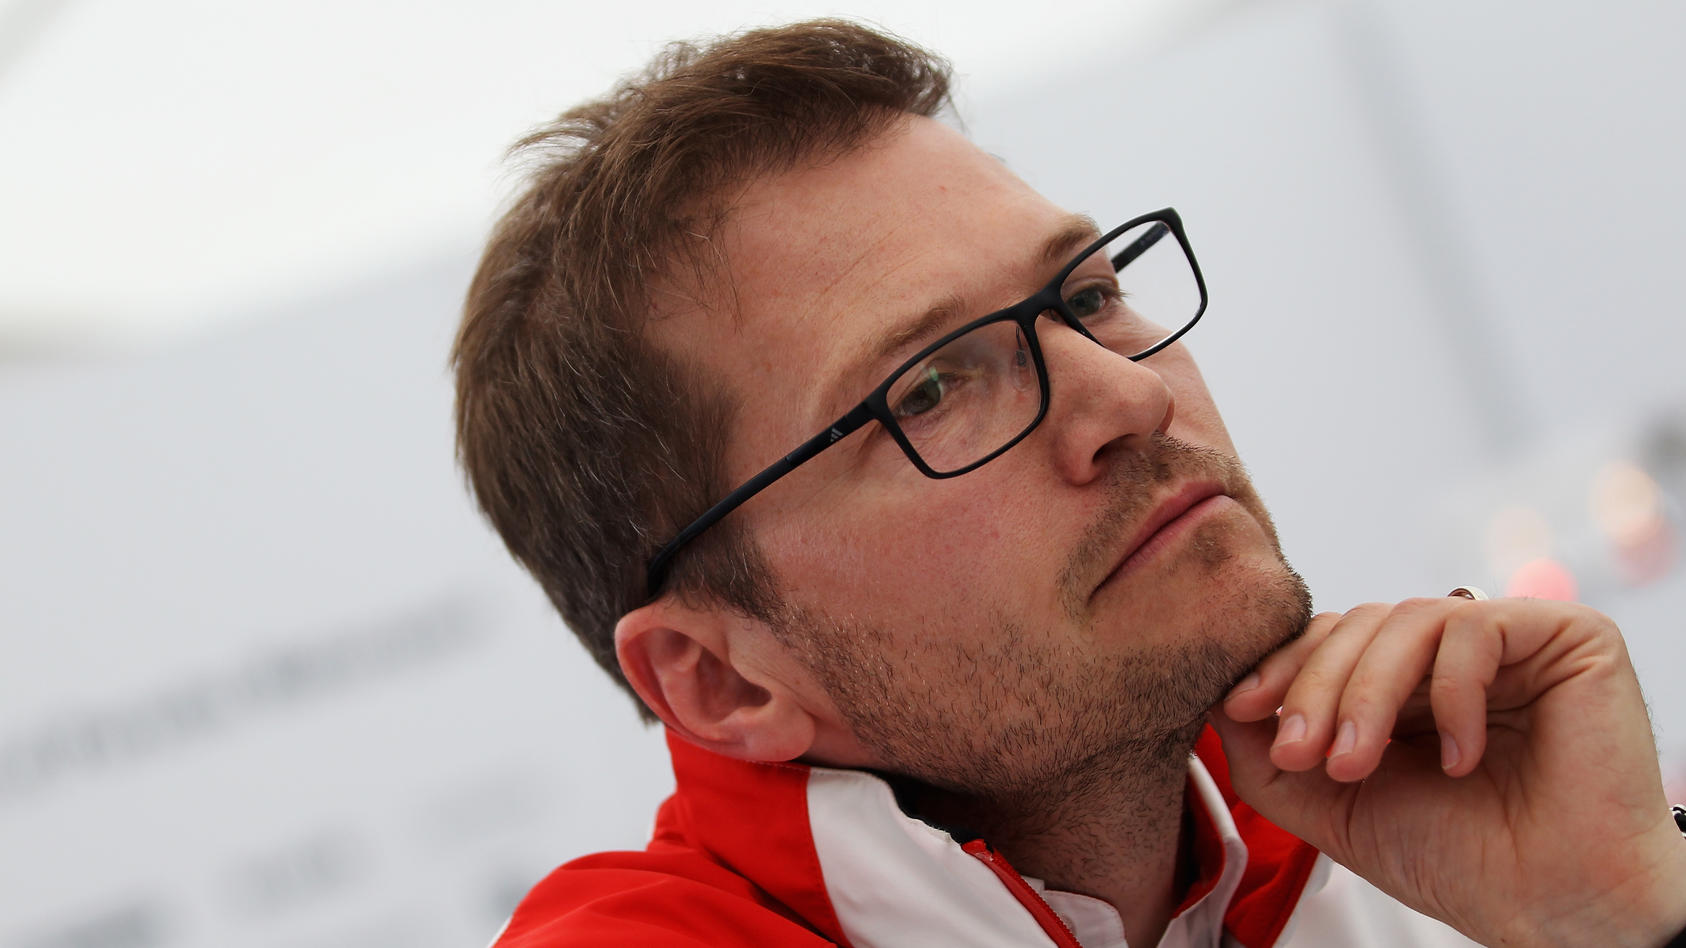 McLaren Appoint Former Porsche WEC LMP1 Boss Andreas Seidl As New Managing Director Of Its F1 Team - NORTHAMPTON, ENGLAND - APRIL 15: Andreas Seidl the Director Race Operations for Porsche LMP Team is interviewed by the media following qualifying for